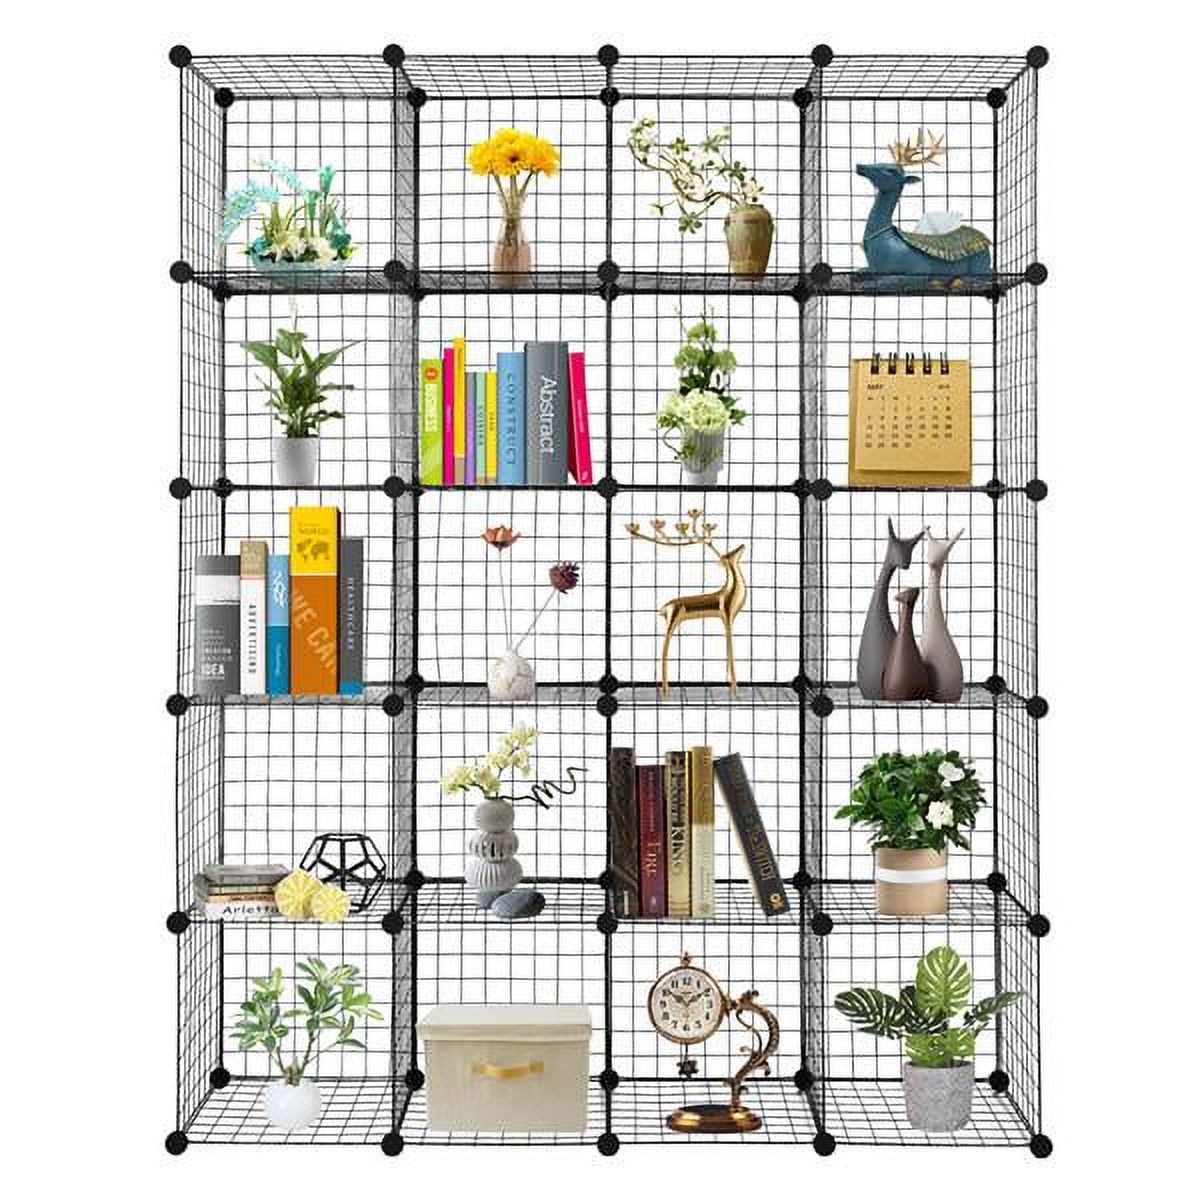 Cube Storage 20-Cube Metal Wire Cube Storage Cubes Shelves Cube Closet Organizer Stackable Storage Bins DIY Storage Grids Modular Wire Cubes Bookshelf Bookcase for Home Office - image 1 of 5